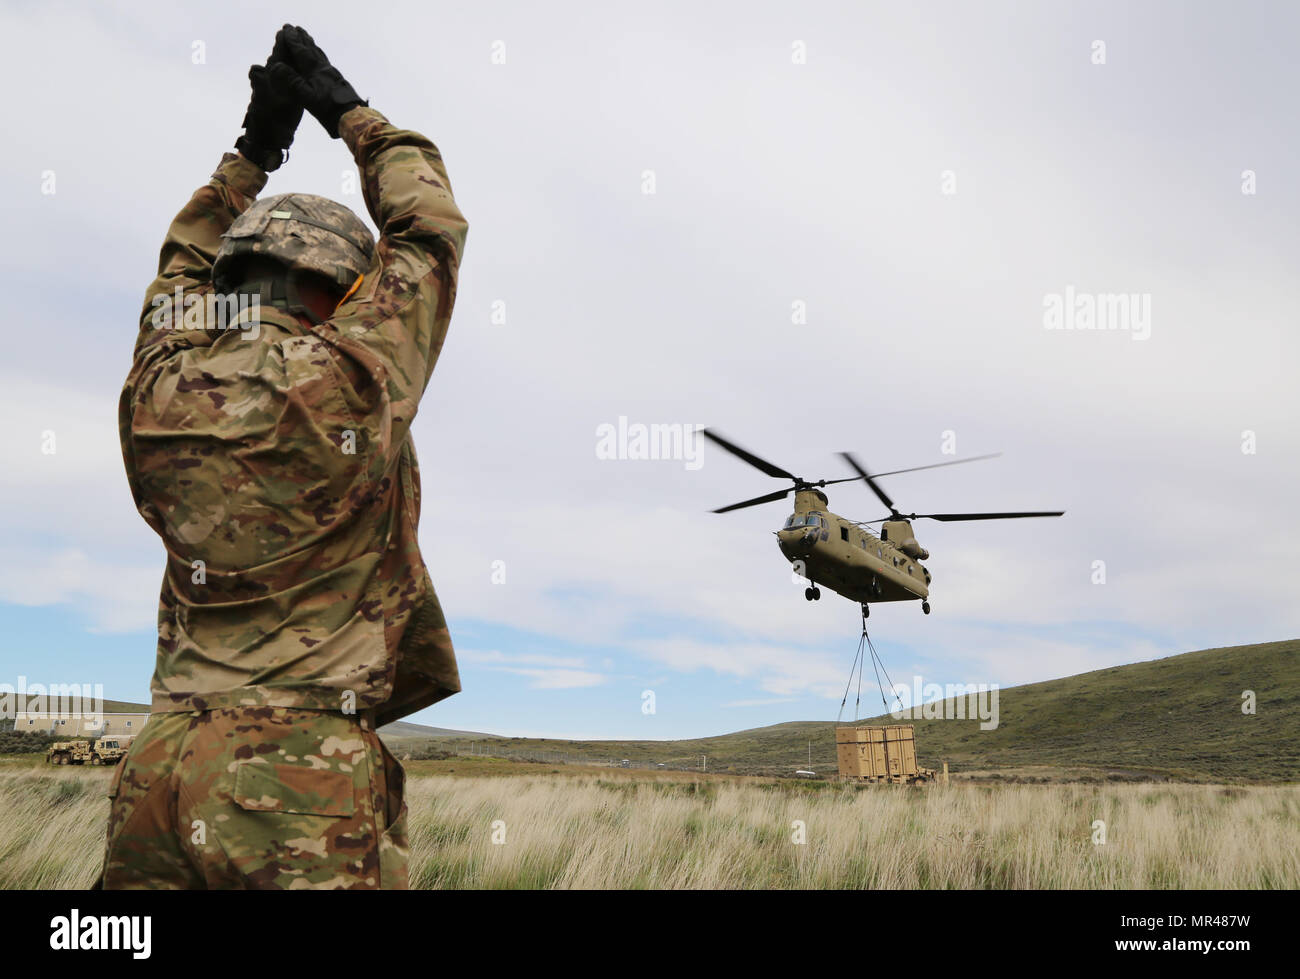 U.S. Army Pvt. Travis Botson, 92nd Chemical Company, 33rd Chemical Battalion, 48th Chemical Brigade, gives arm and hand signals to a CH-47 Chinook during a sling load operation at the Yakima Training Center, Yakima, Wash., May 5, 2017. Sling load operations allow units to accomplish their mission by rapidly relocating supplies and equipment, bypassing surface obstacles. (U.S. Army photo by Sgt. Kalie Jones) Stock Photo